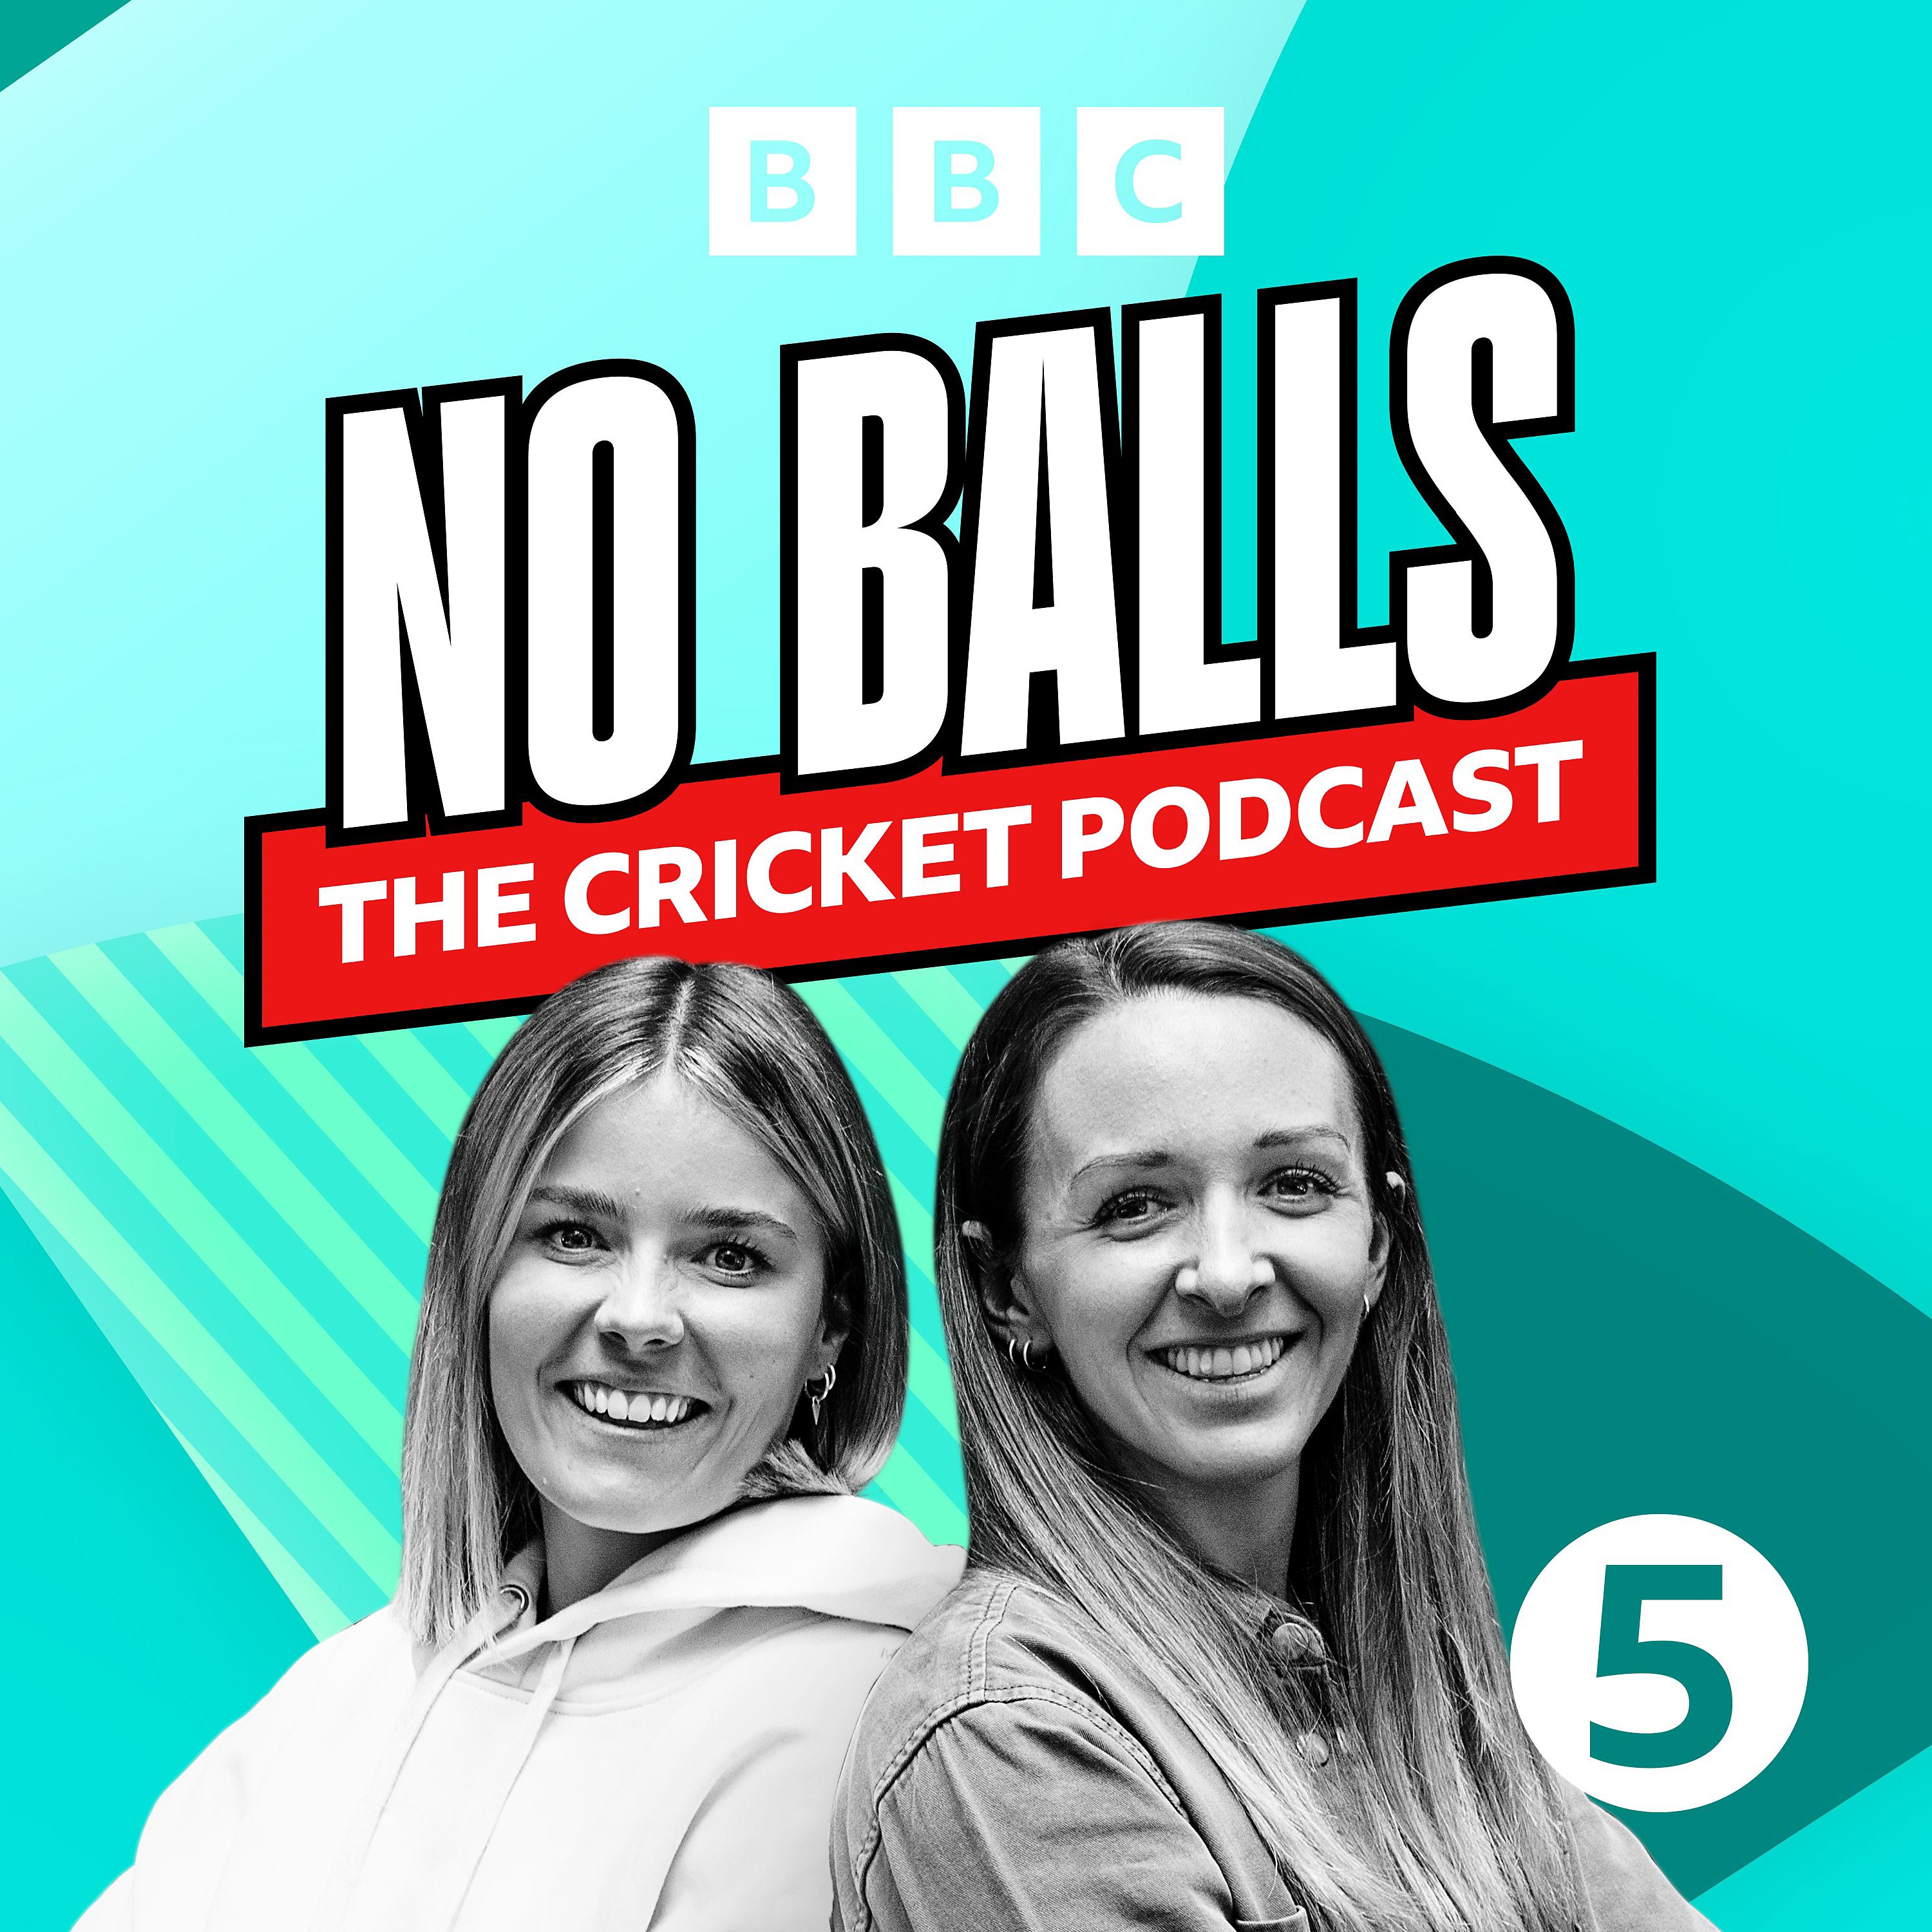 No Balls: The Cricket Podcast - New cars, England's men in India and a boost for Hundred salaries